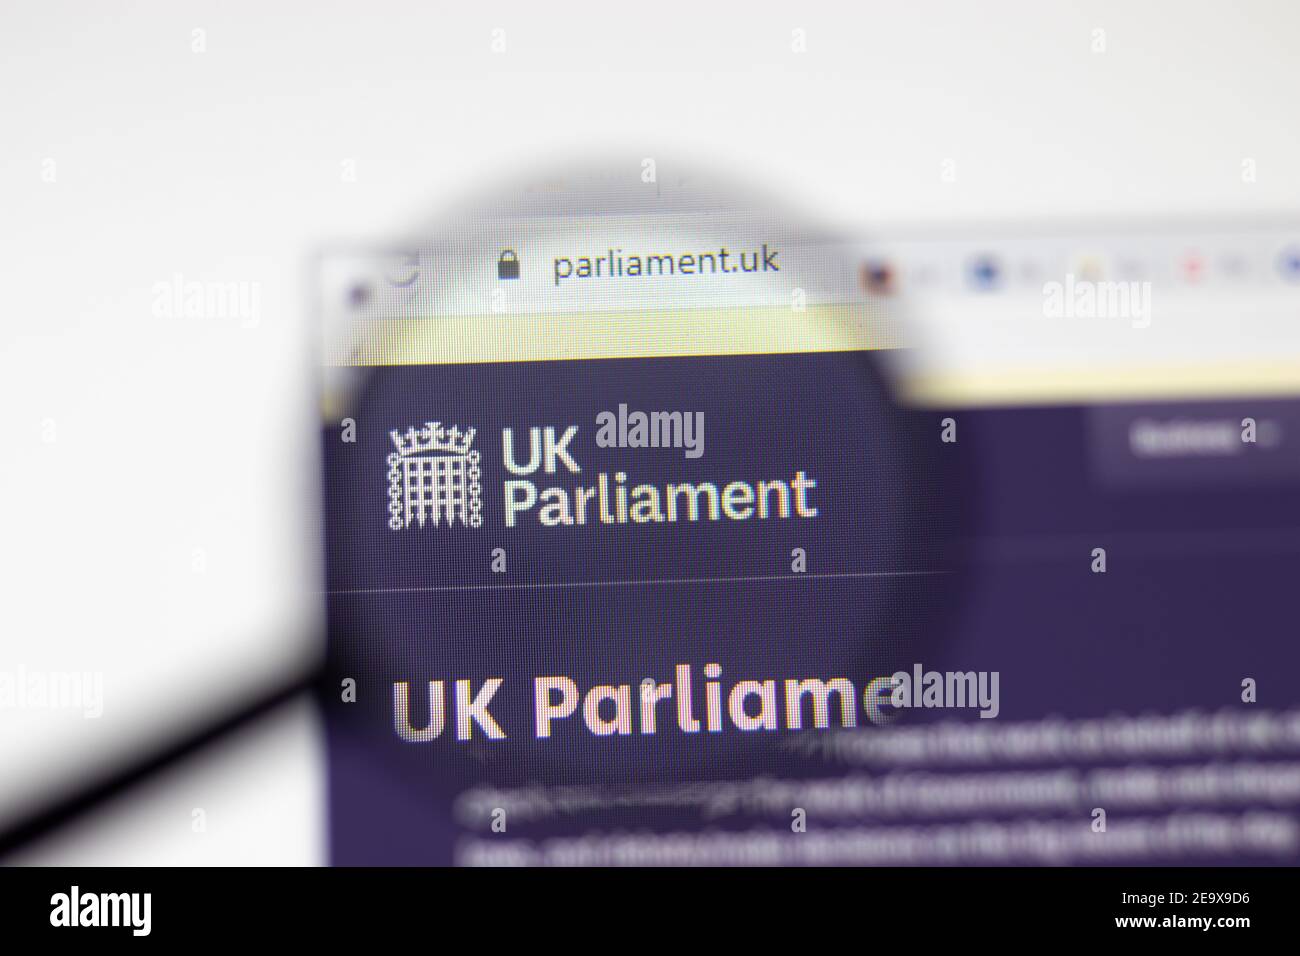 Los Angeles, USA - 1 February 2021: UK Parliament website page. Parliament.uk logo on display screen, Illustrative Editorial Stock Photo